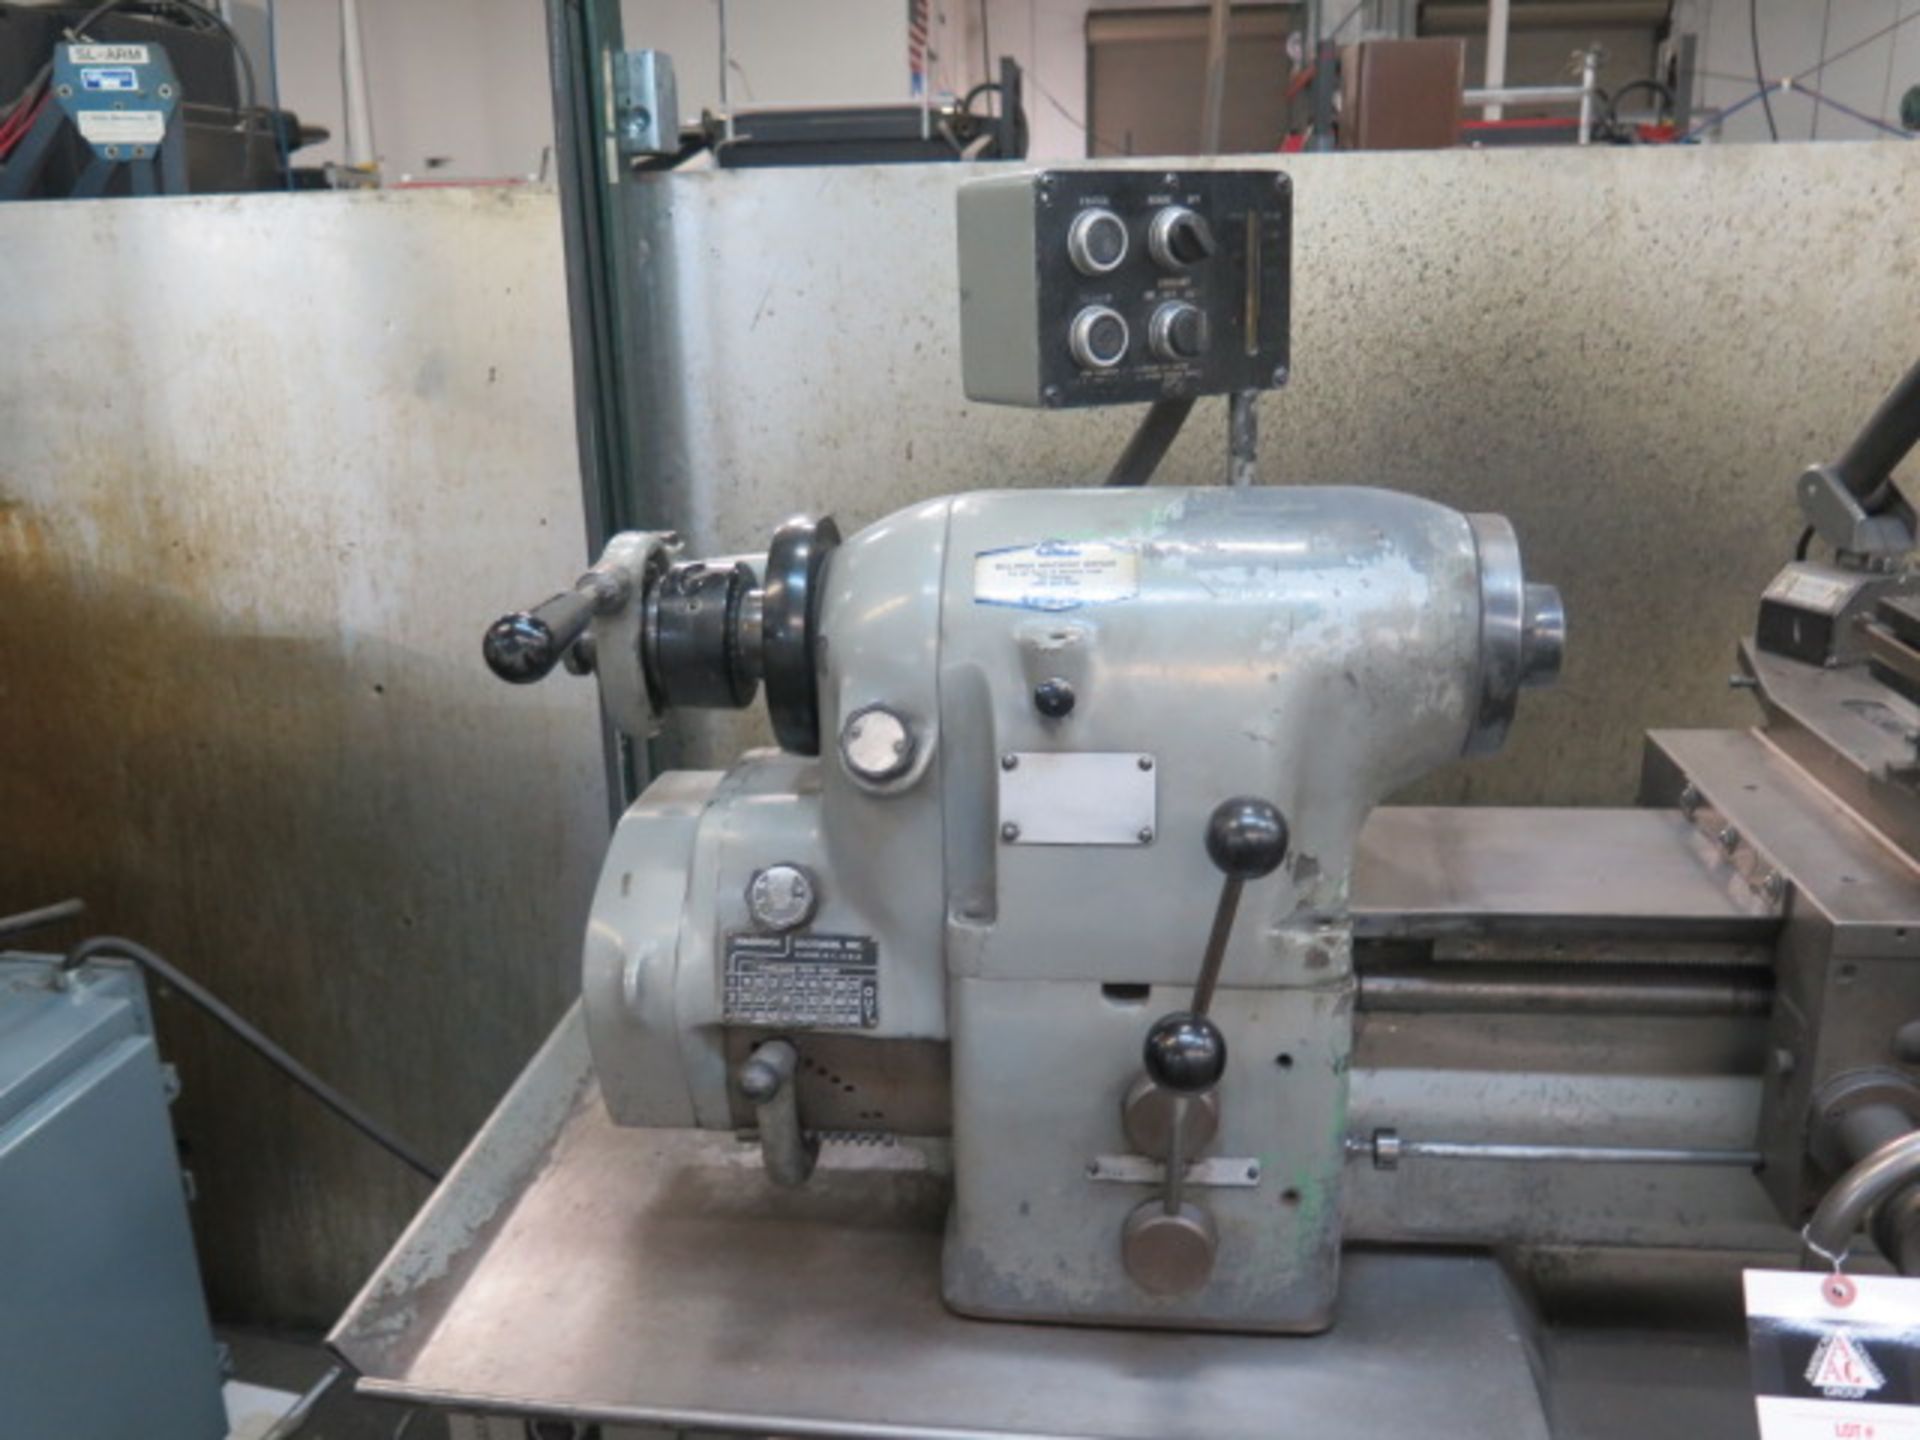 Hardinge HLV-H Wide Bed Tool Room Lathe s/n HLV-H-3211 w/ 125-3000 RPM, Inch Threading, SOLD AS IS - Image 4 of 13